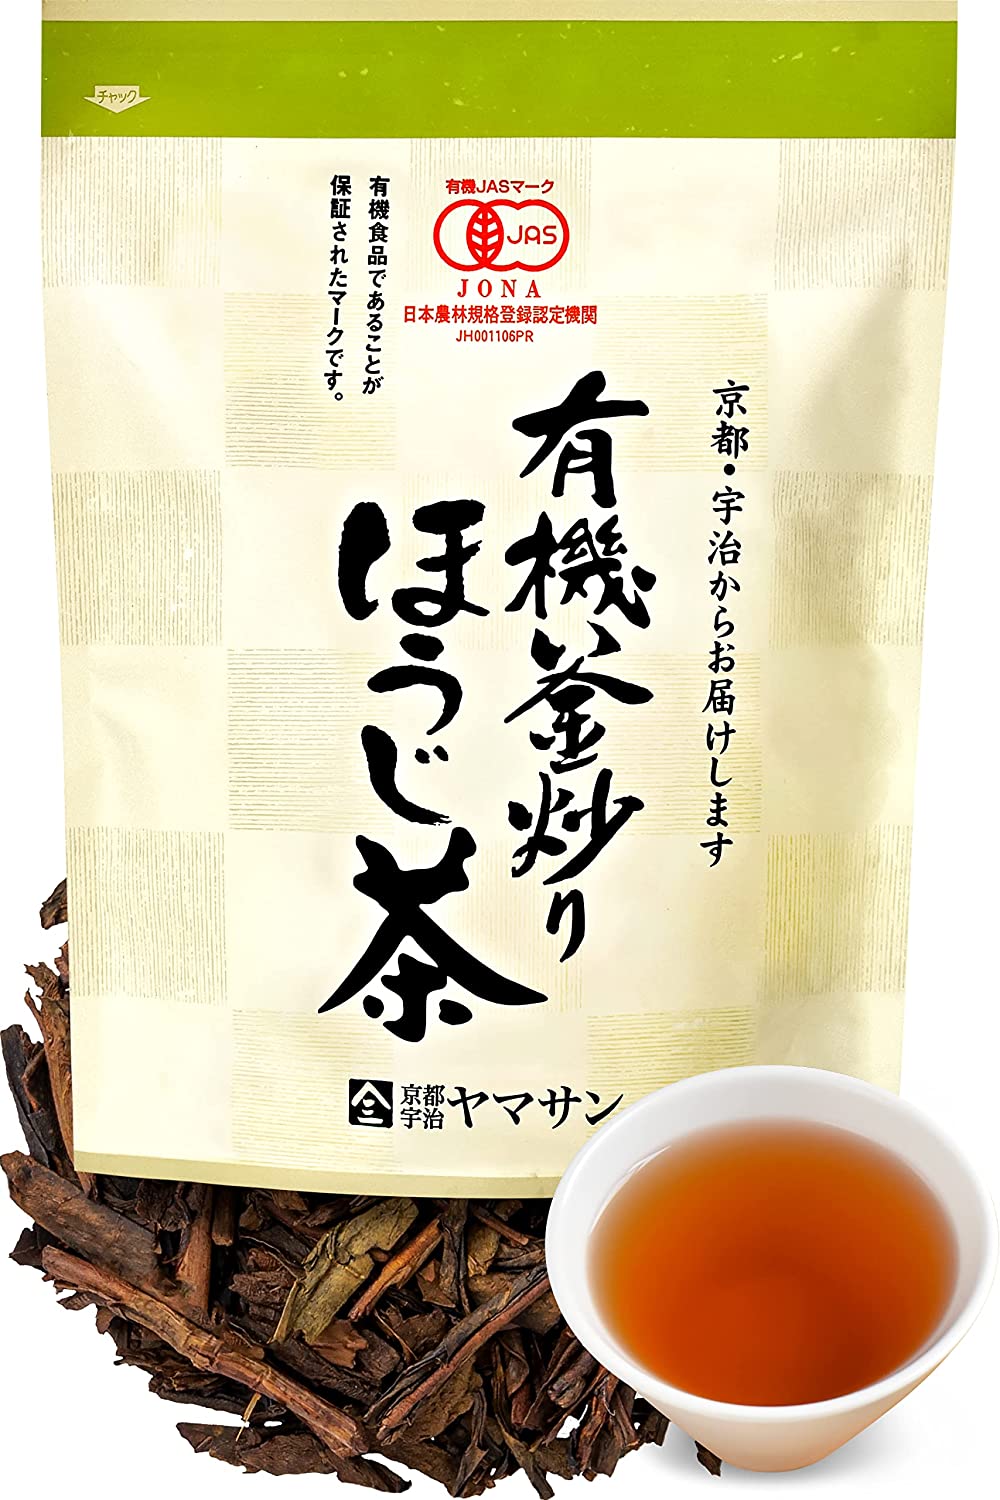 Organic Pot-roasted Tea [Domestic Pesticide-free, Cold-brewed also recommended] Catechin Green Tea 150g by Kyoto Uji Yamasan - NihonMura